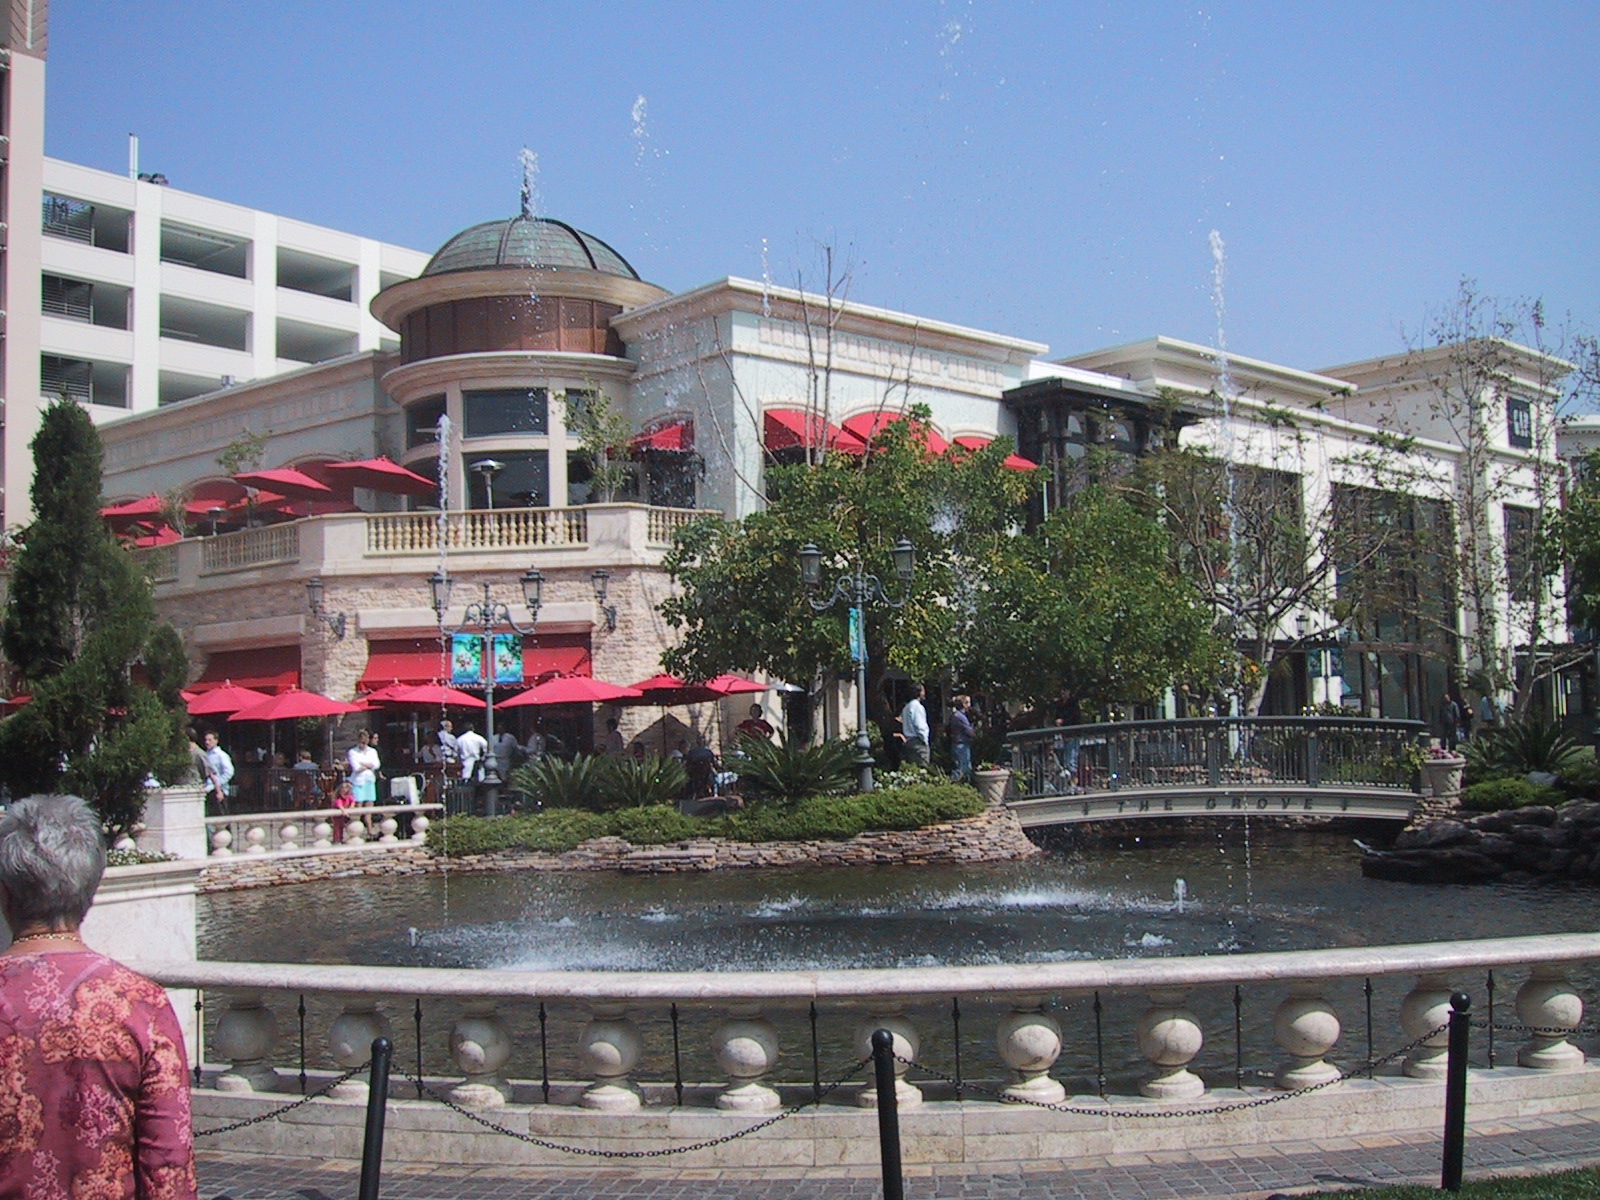 a pond surrounded by a plaza in the daytime